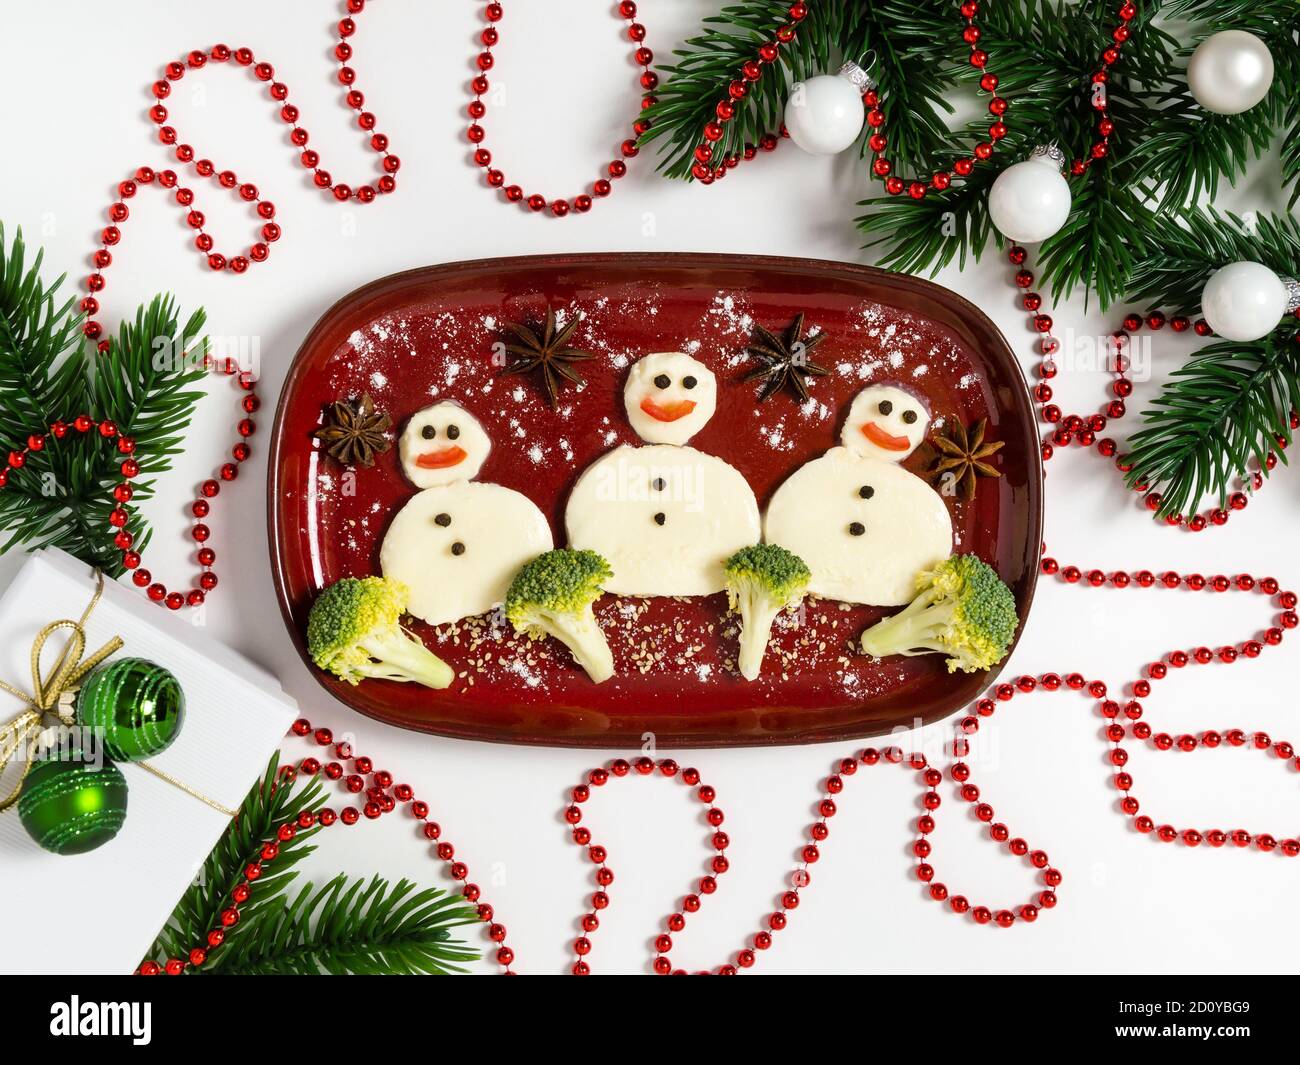 Funny plate with three snowmen made of mozzarella cheese and broccoli. Breakfast idea for kids. Vegetarian food art for New Year or Christmas celebrat Stock Photo